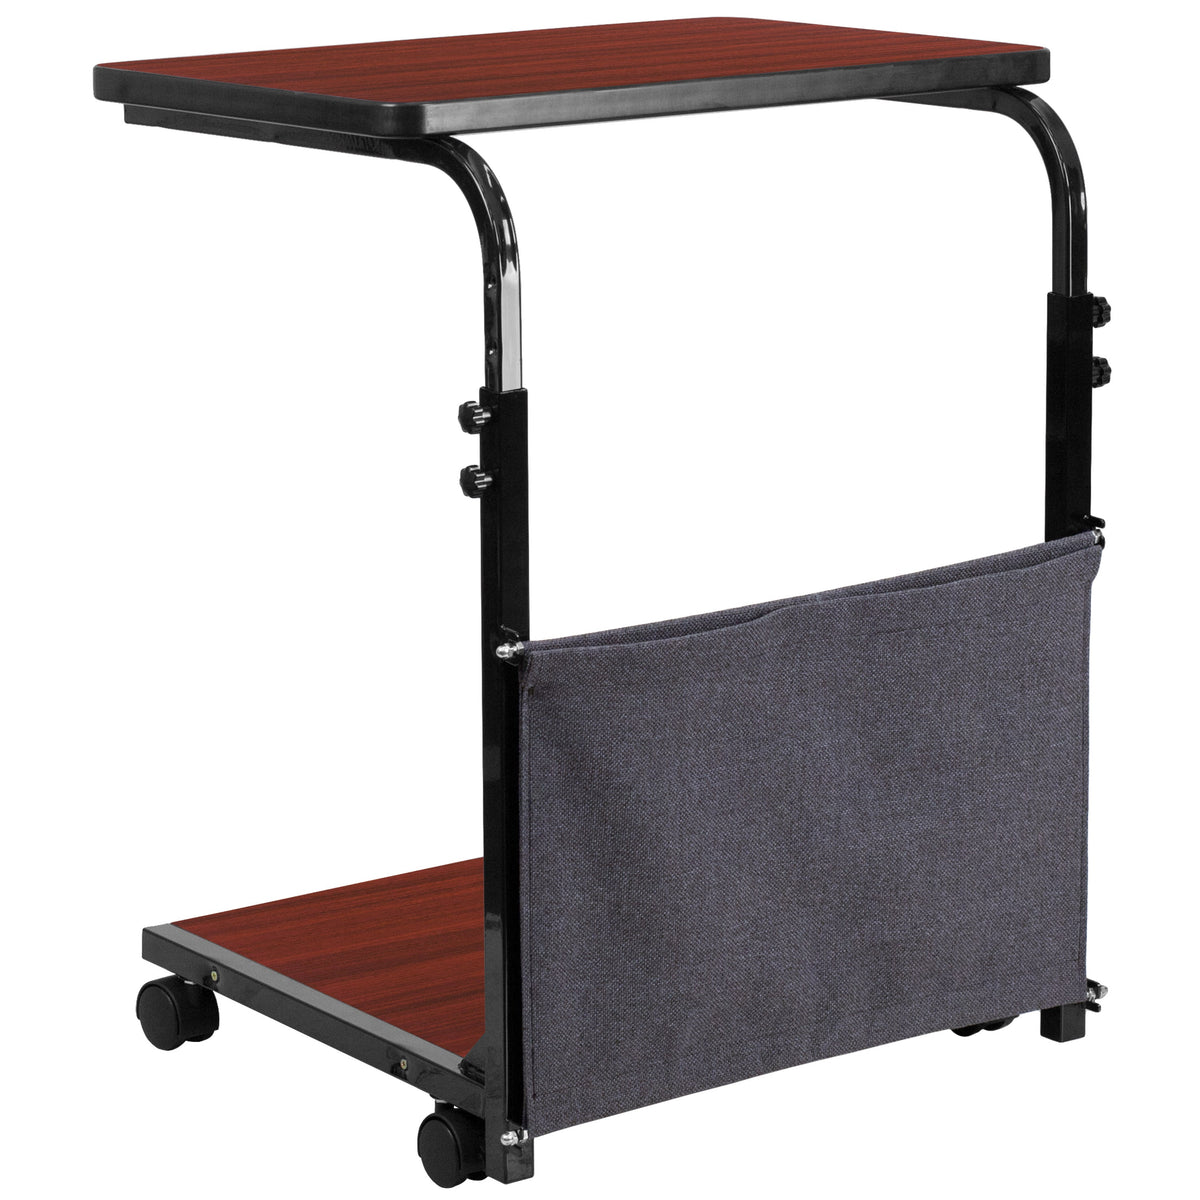 Mobile Sit/Stand Mahogany Desk w/ Removable Pouch (Adj Range 27inch - 46.5inch)